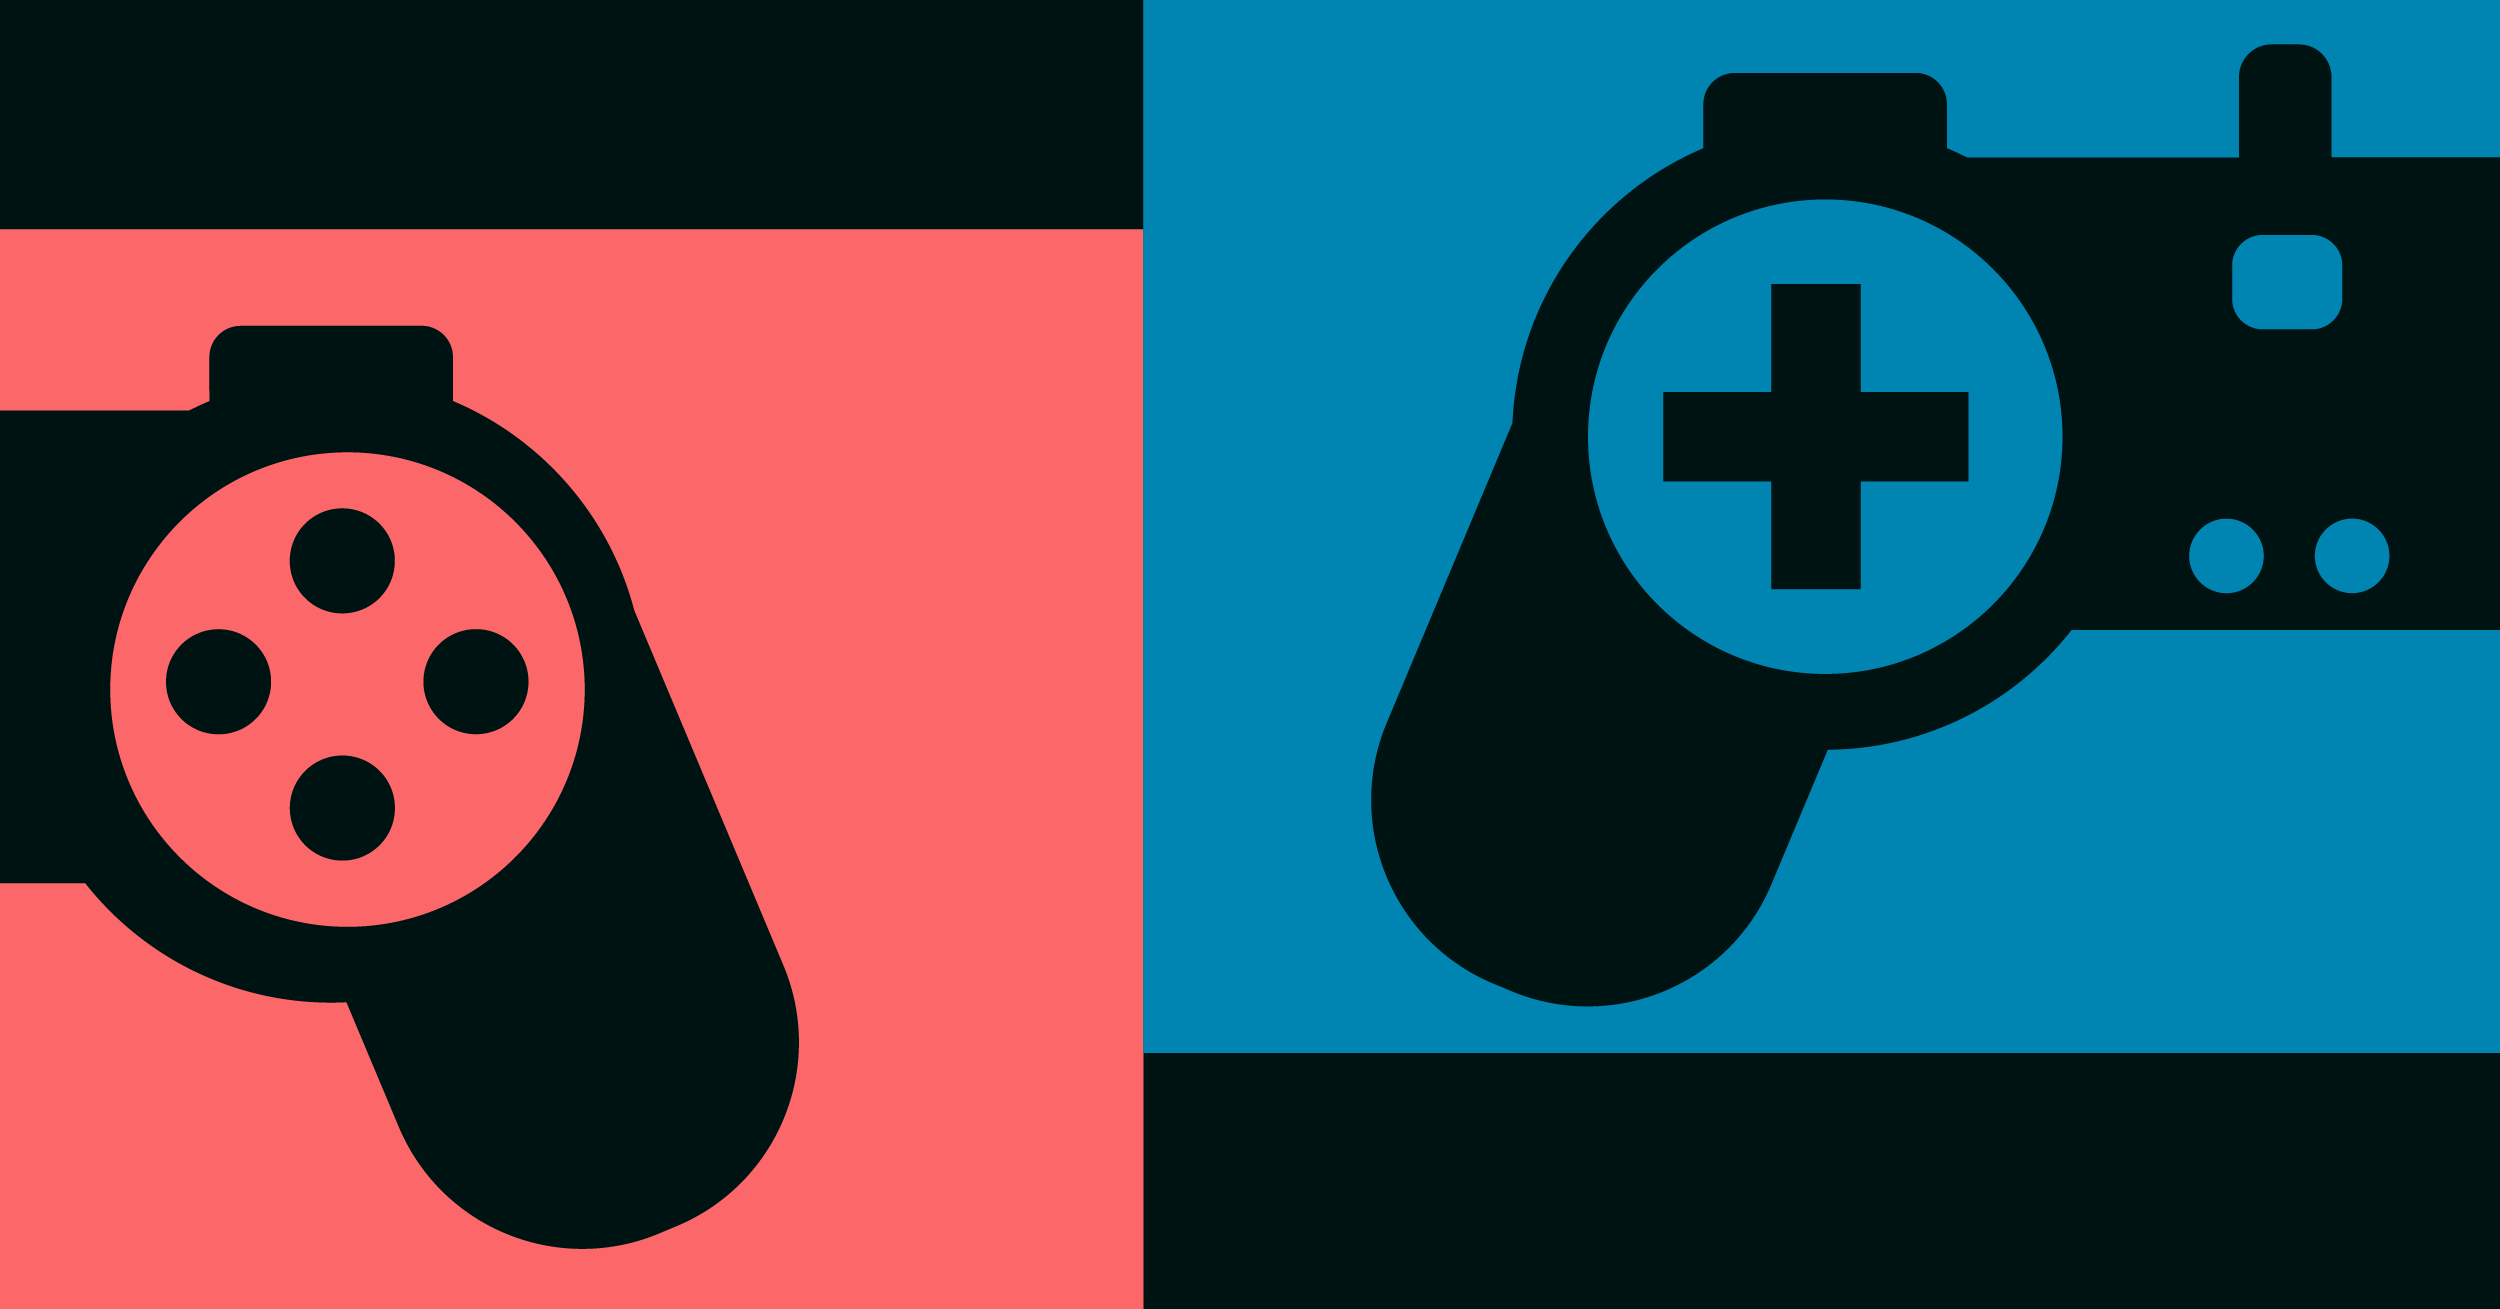 Illustration of half of a black video game controller outlined in a salmon-color and half of a black video game controller outlined in blue in front of a black background depicting the electronic gaming and multimedia industry